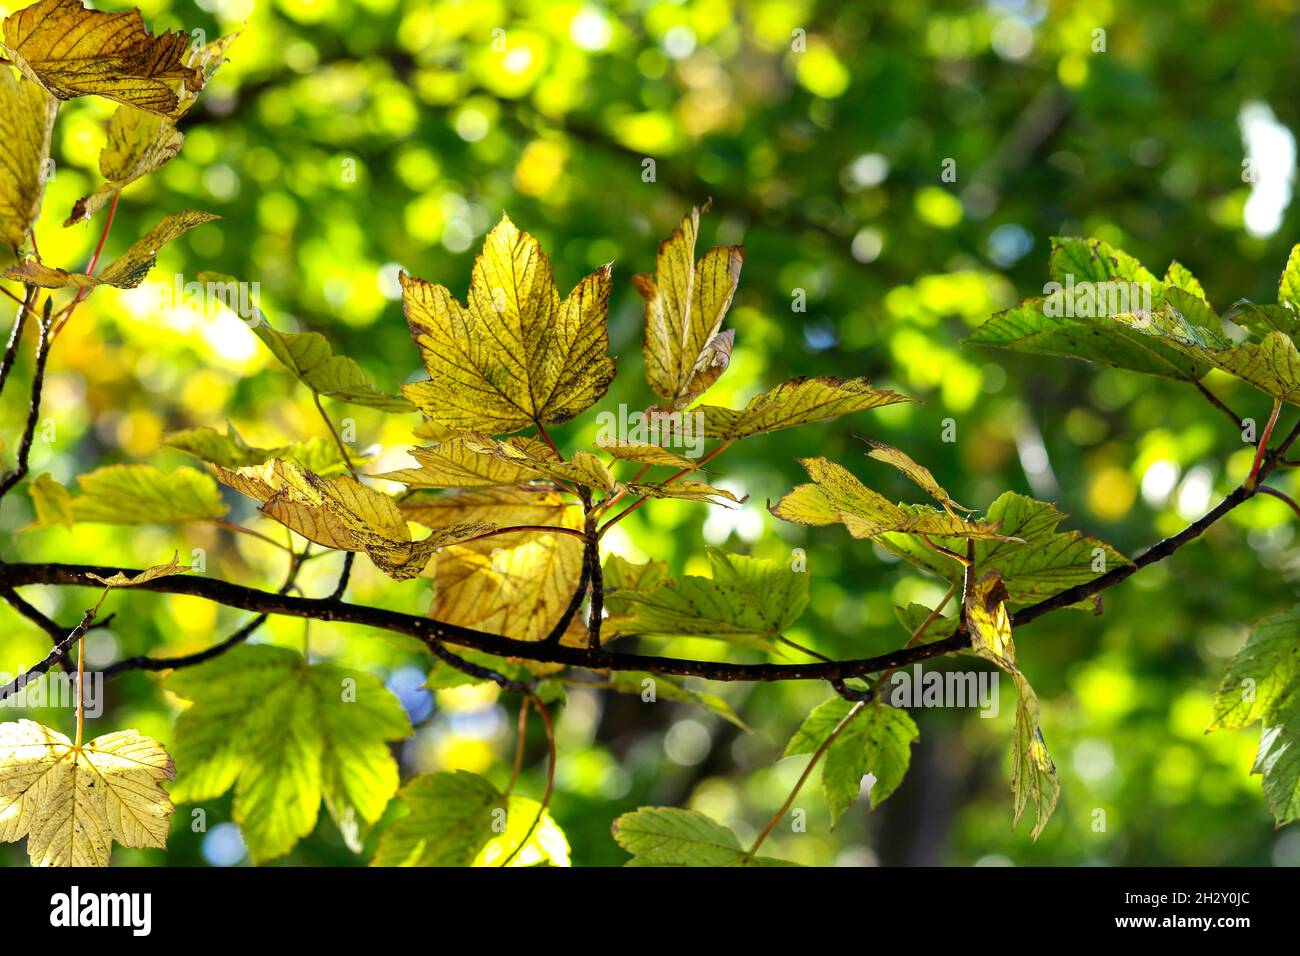 Sycamore leaves 'Acer pseudoplatanus' on tree branch backlit by sunlight. Foliage changing green yellow color during Autumn. Bokeh background. Ireland Stock Photo